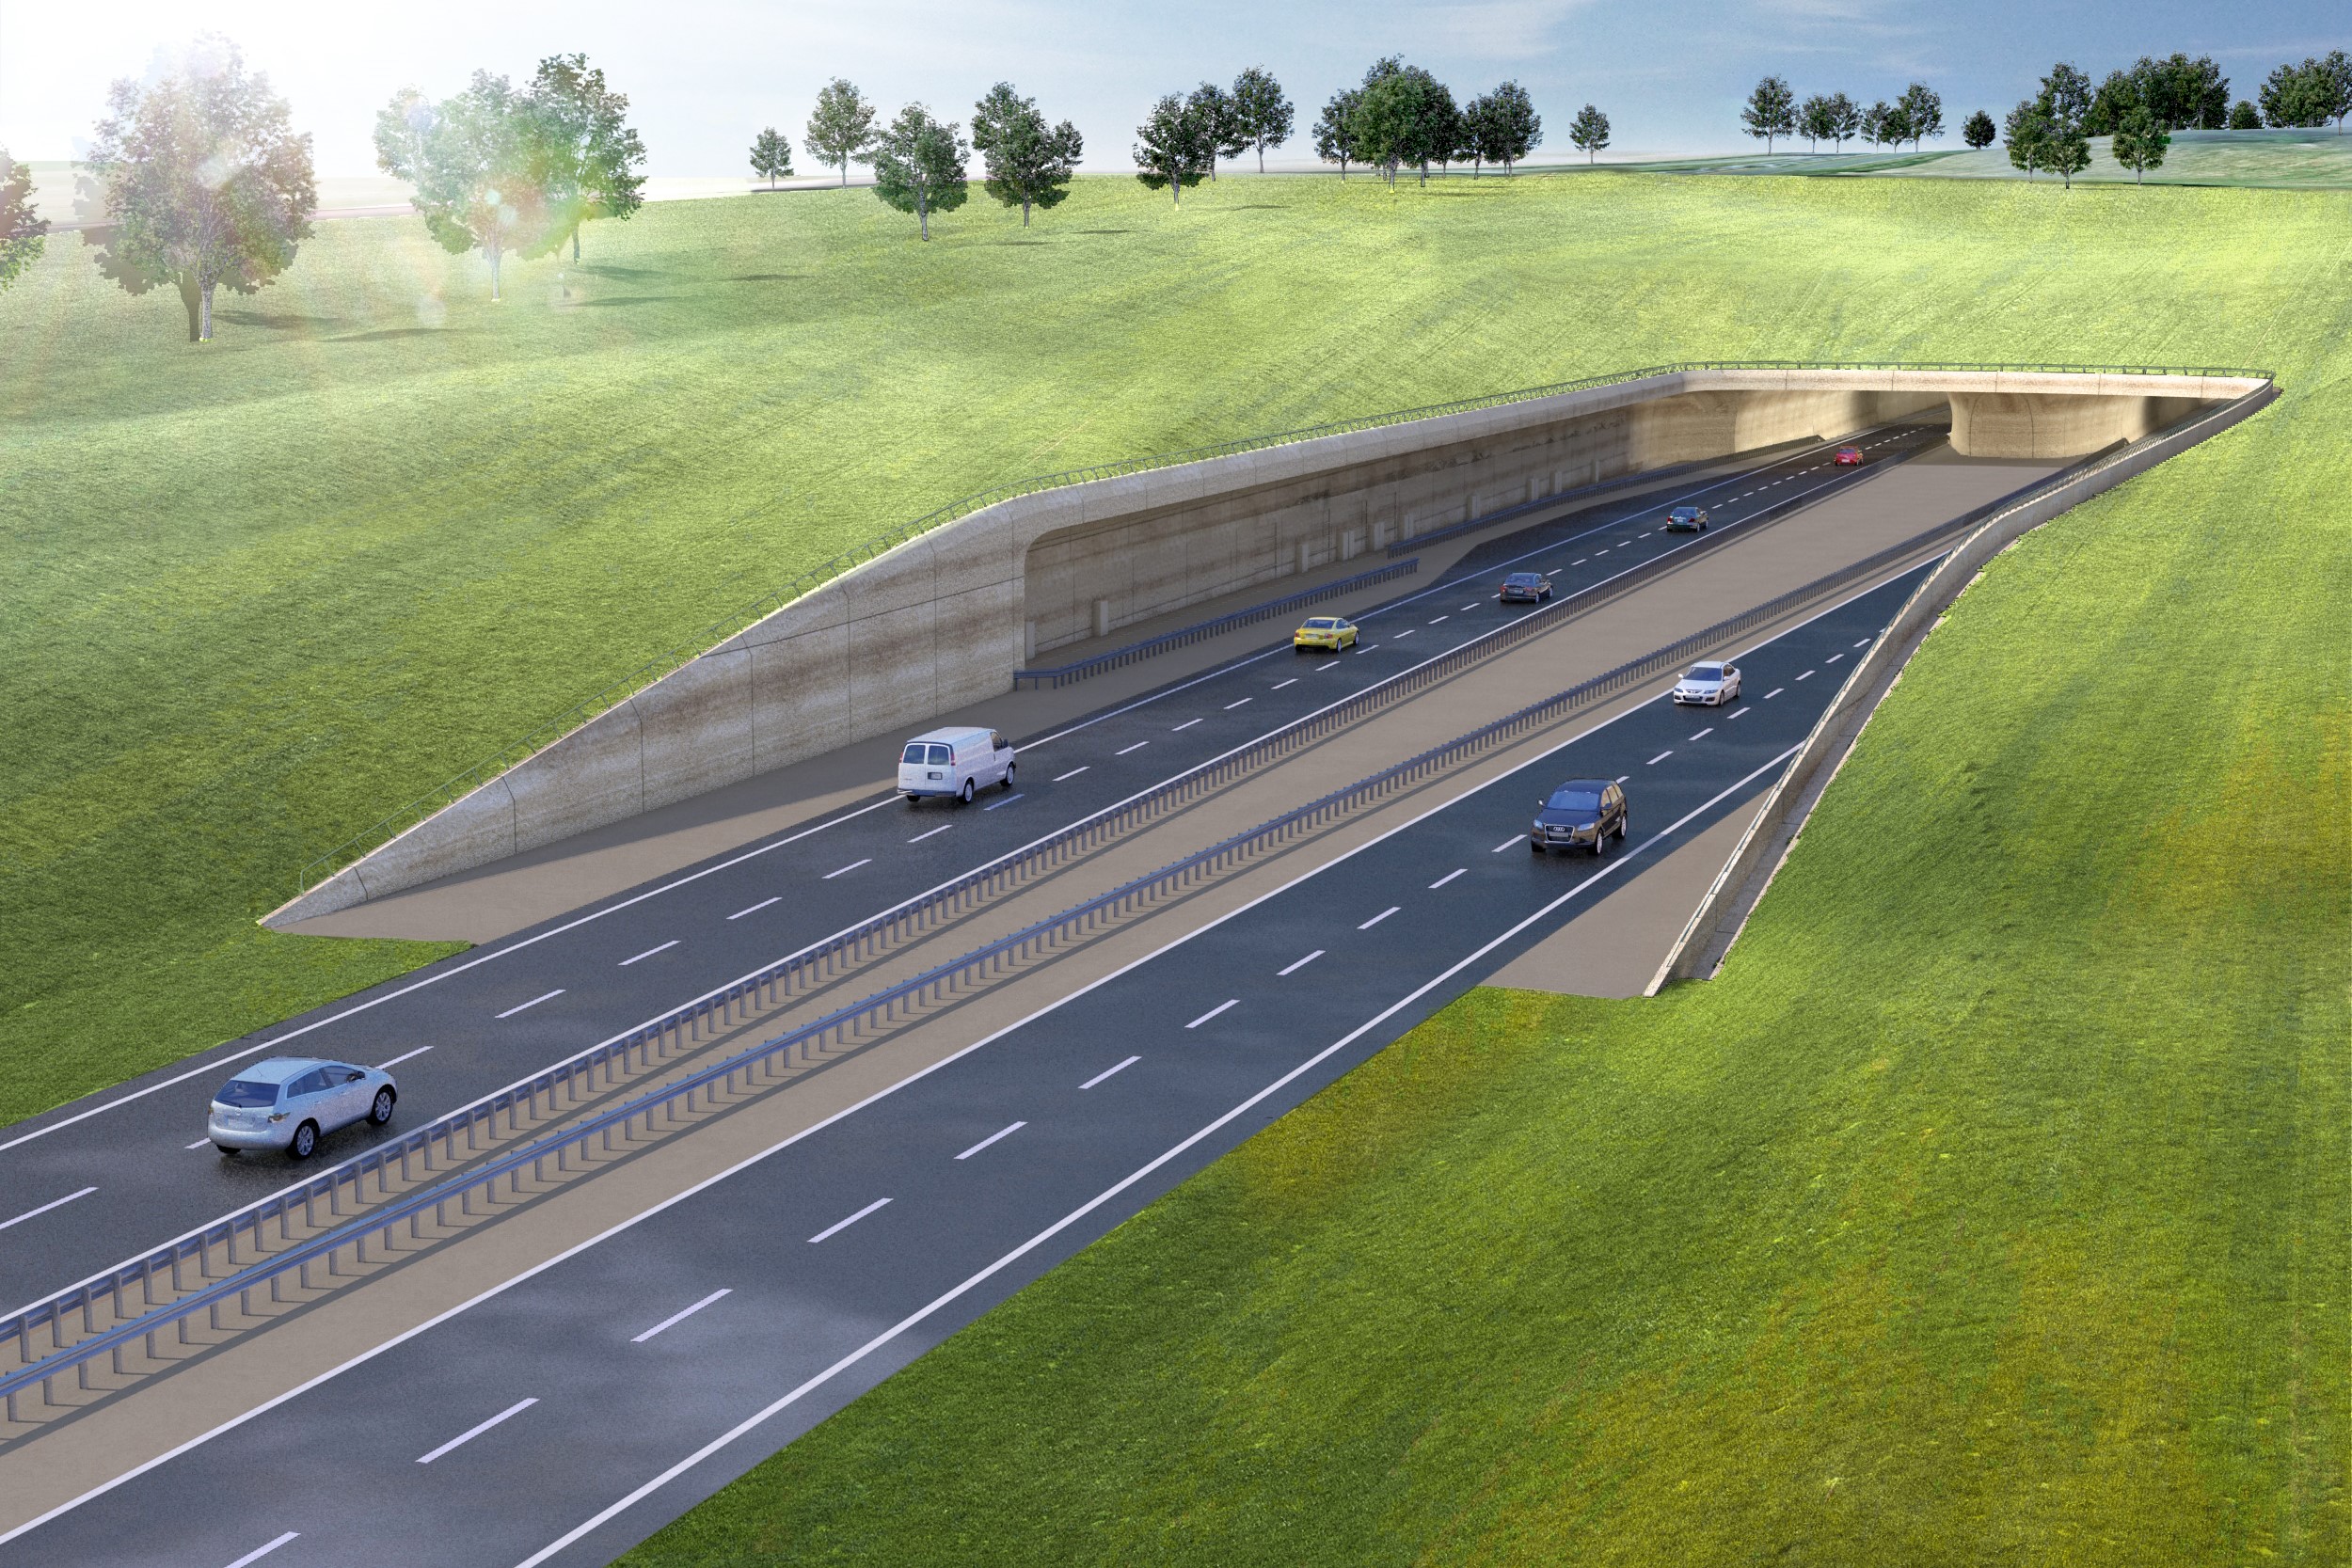 Stonehenge Tunnel Project Faces Renewed Scrutiny and International Concerns